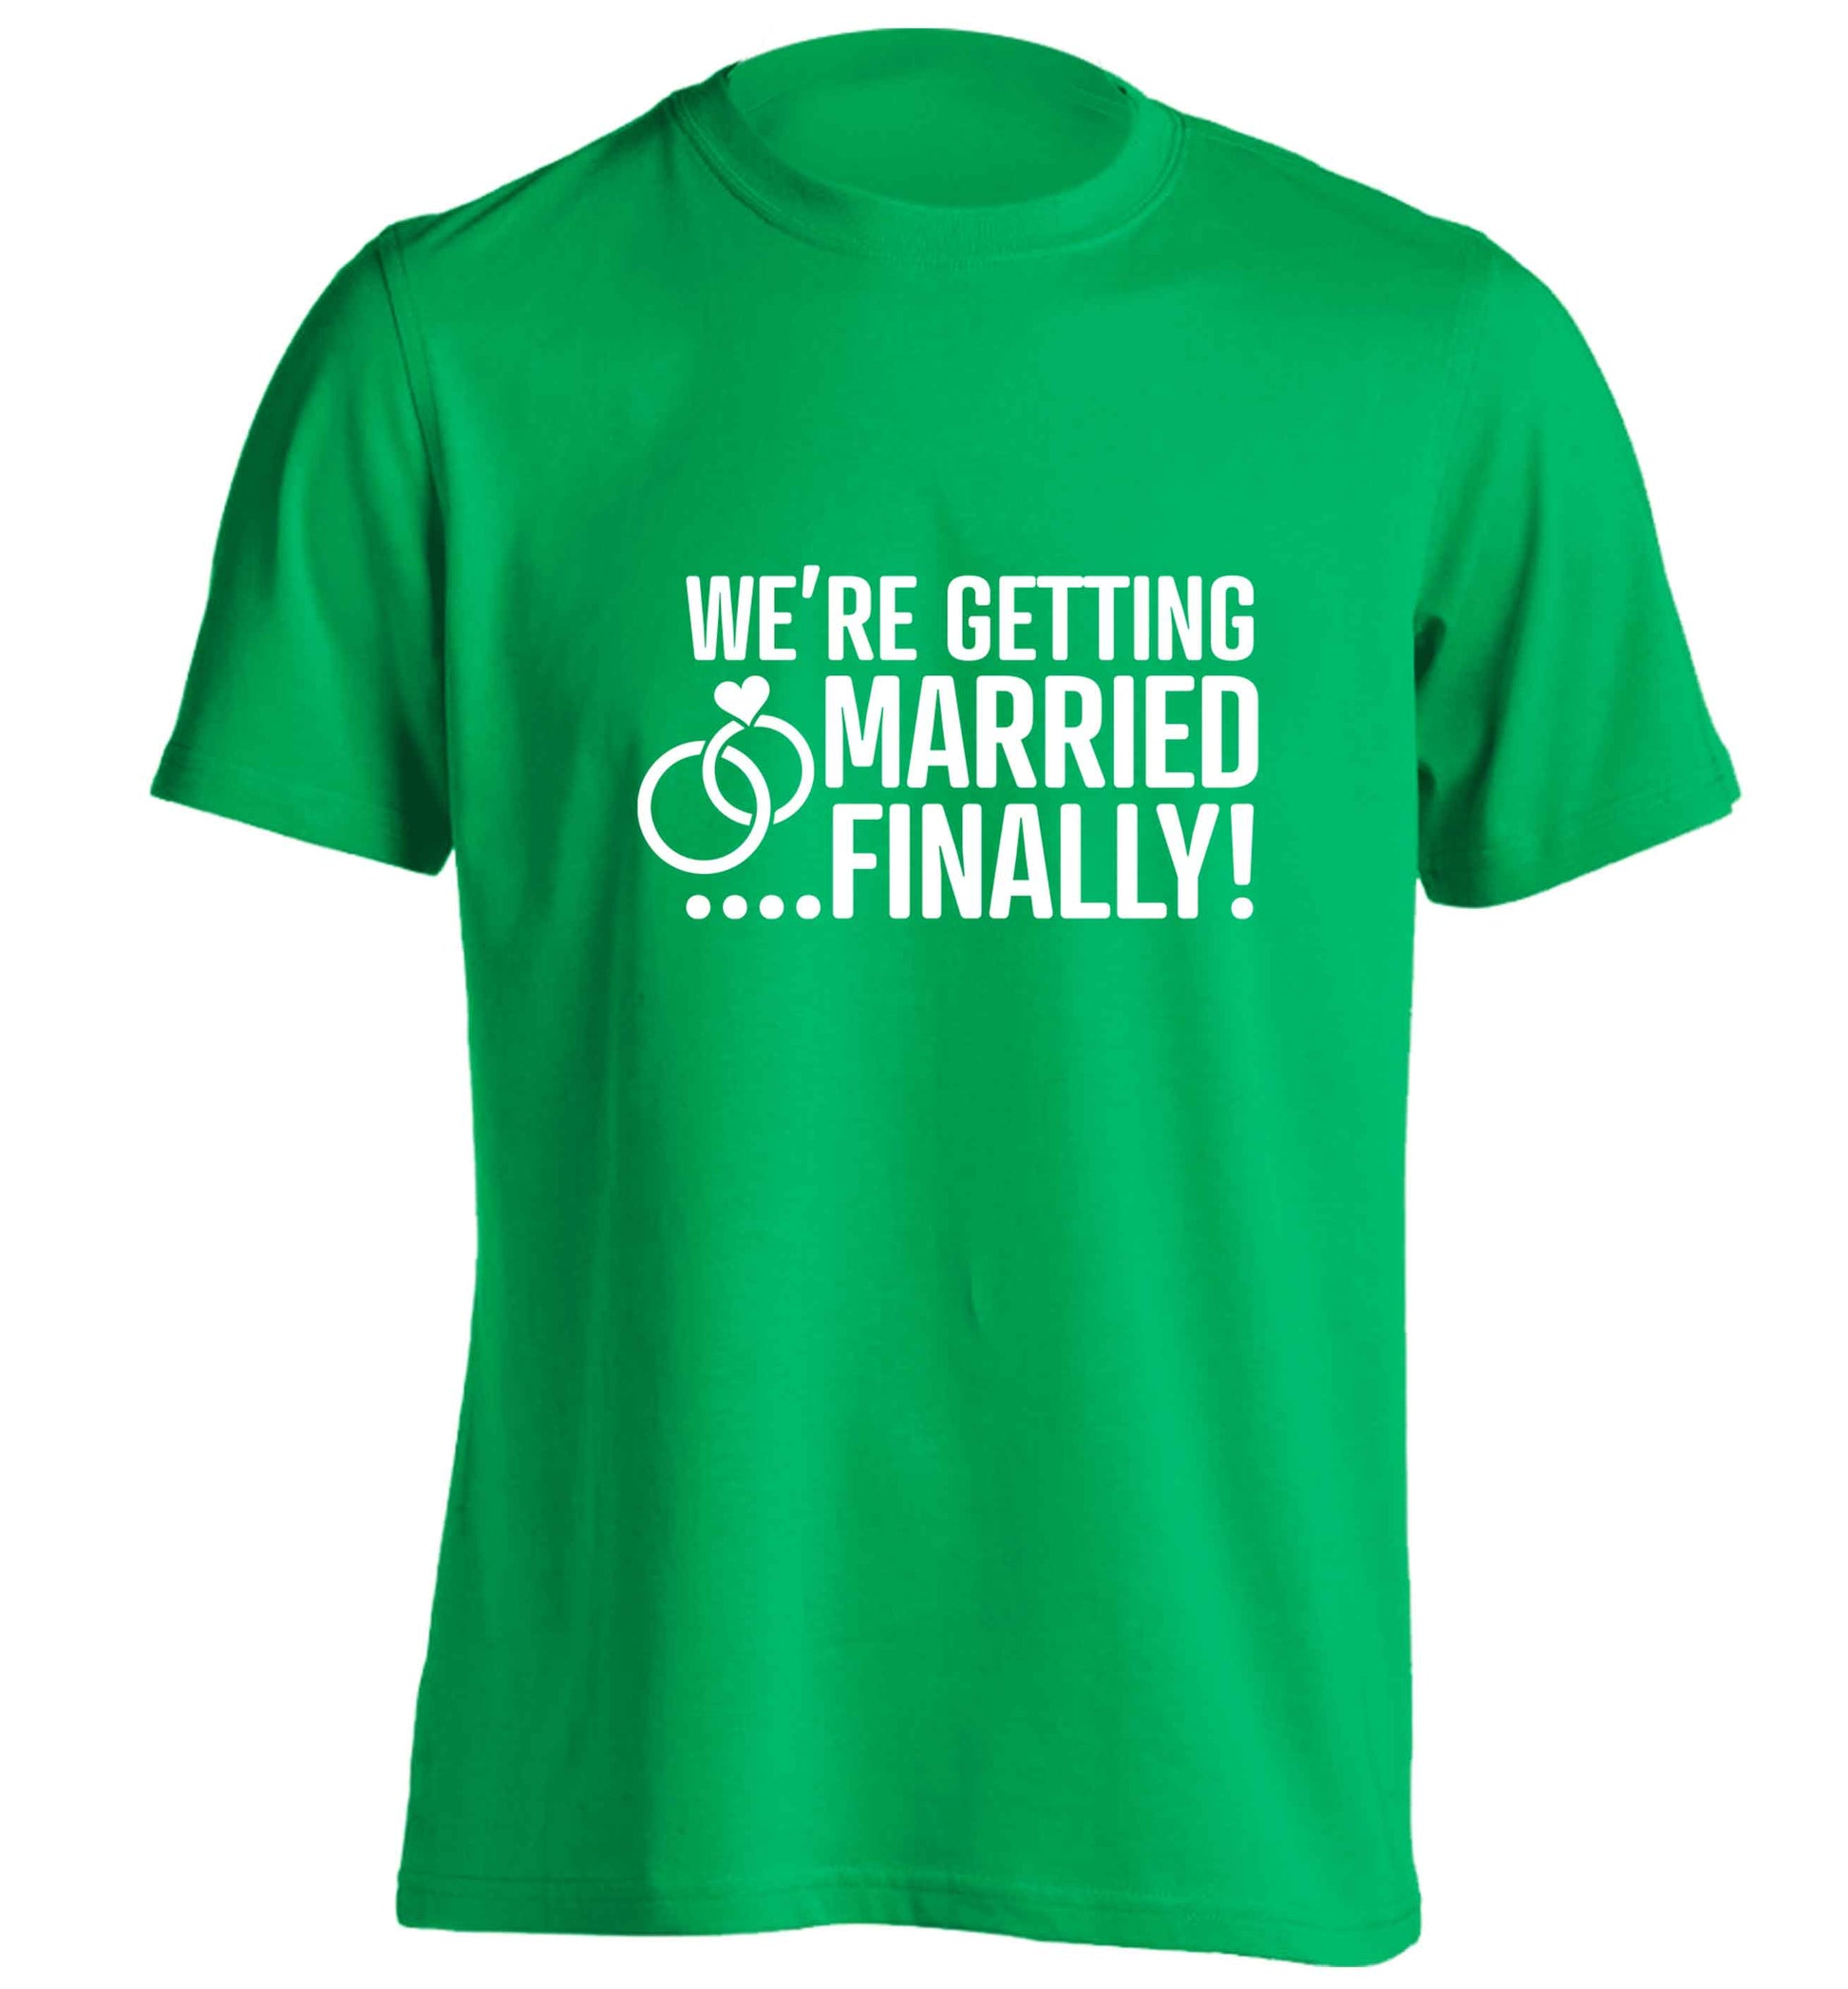 It's been a long wait but it's finally happening! Let everyone know you're celebrating your big day soon! adults unisex green Tshirt 2XL